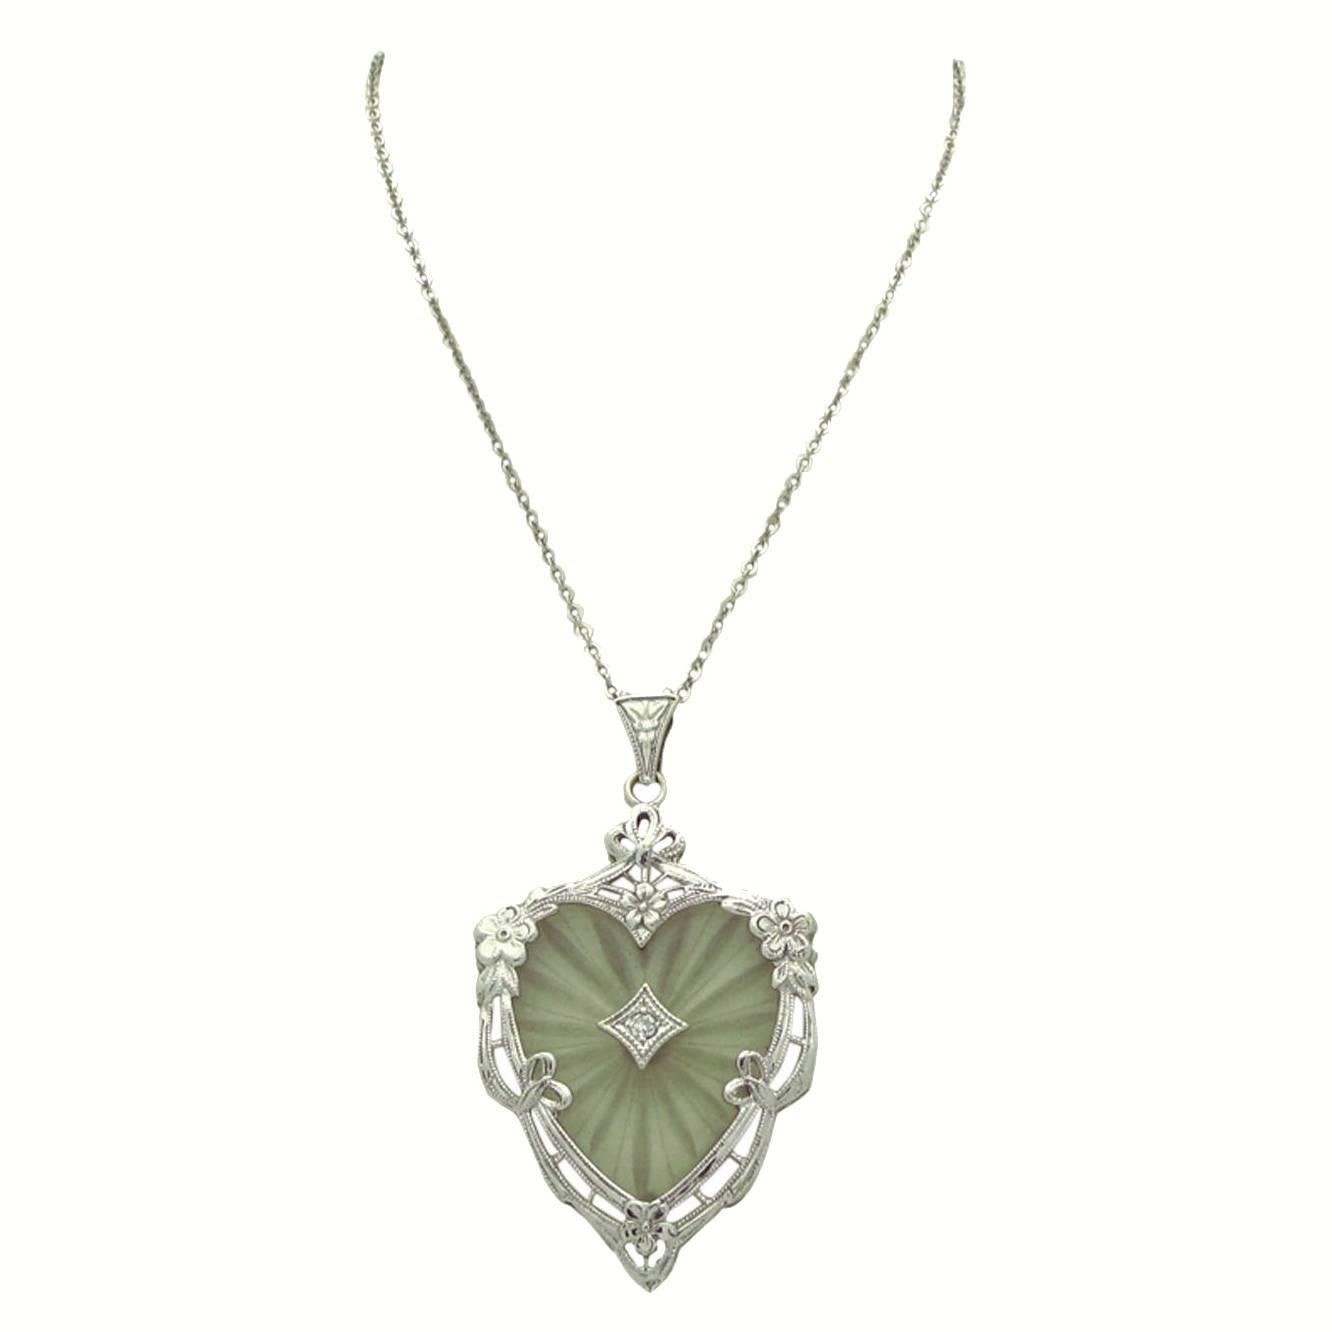 This stunning Art Deco 'Crystal Ray' Necklace is exemplified by the rays pulsating from a center diamond into this beautiful heart shape. Certainly a wonderful gift to bestow on your amour.